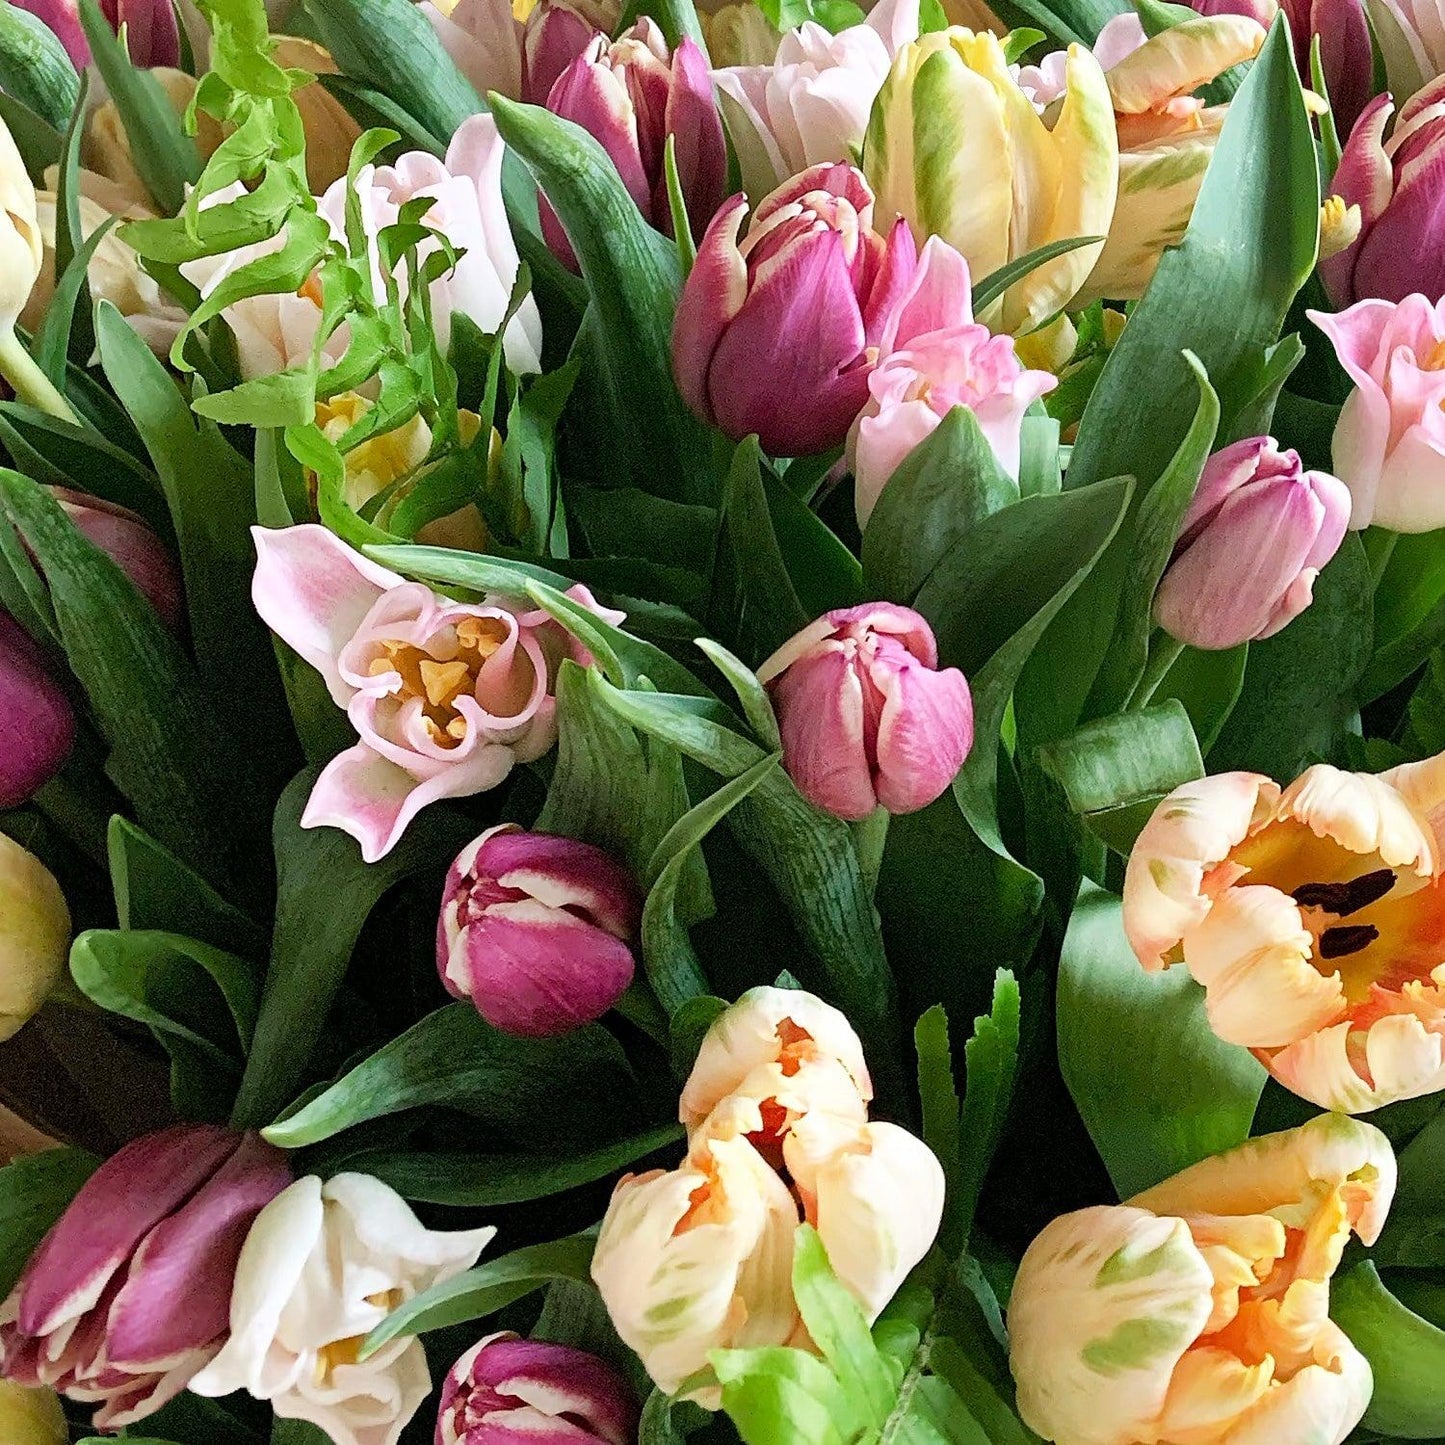 Wonderblooms monthly flower subscription from Quince Flowers, Toronto Florist and flower delivery. Order online for flower & plant subscriptions from the best florist in Toronto near you.